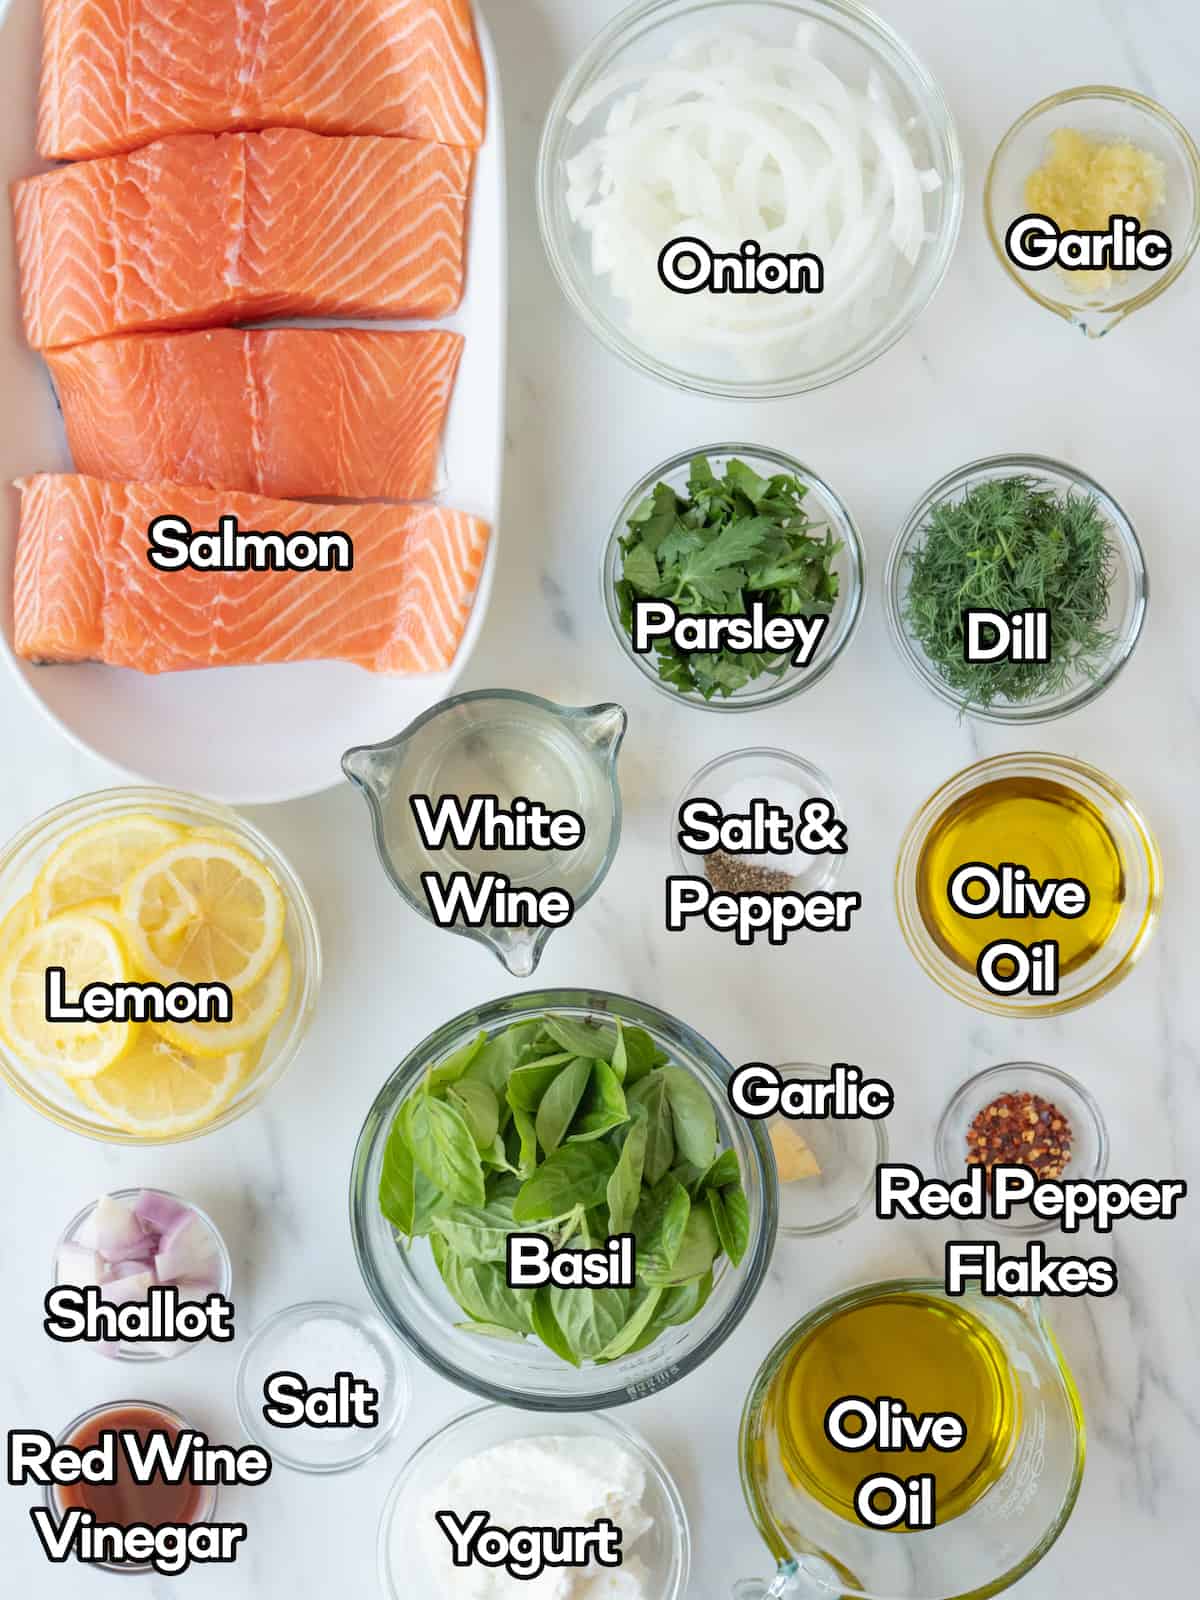 Mise-en-place with all the ingredients required to make steamed salmon and an herby green yogurt sauce.